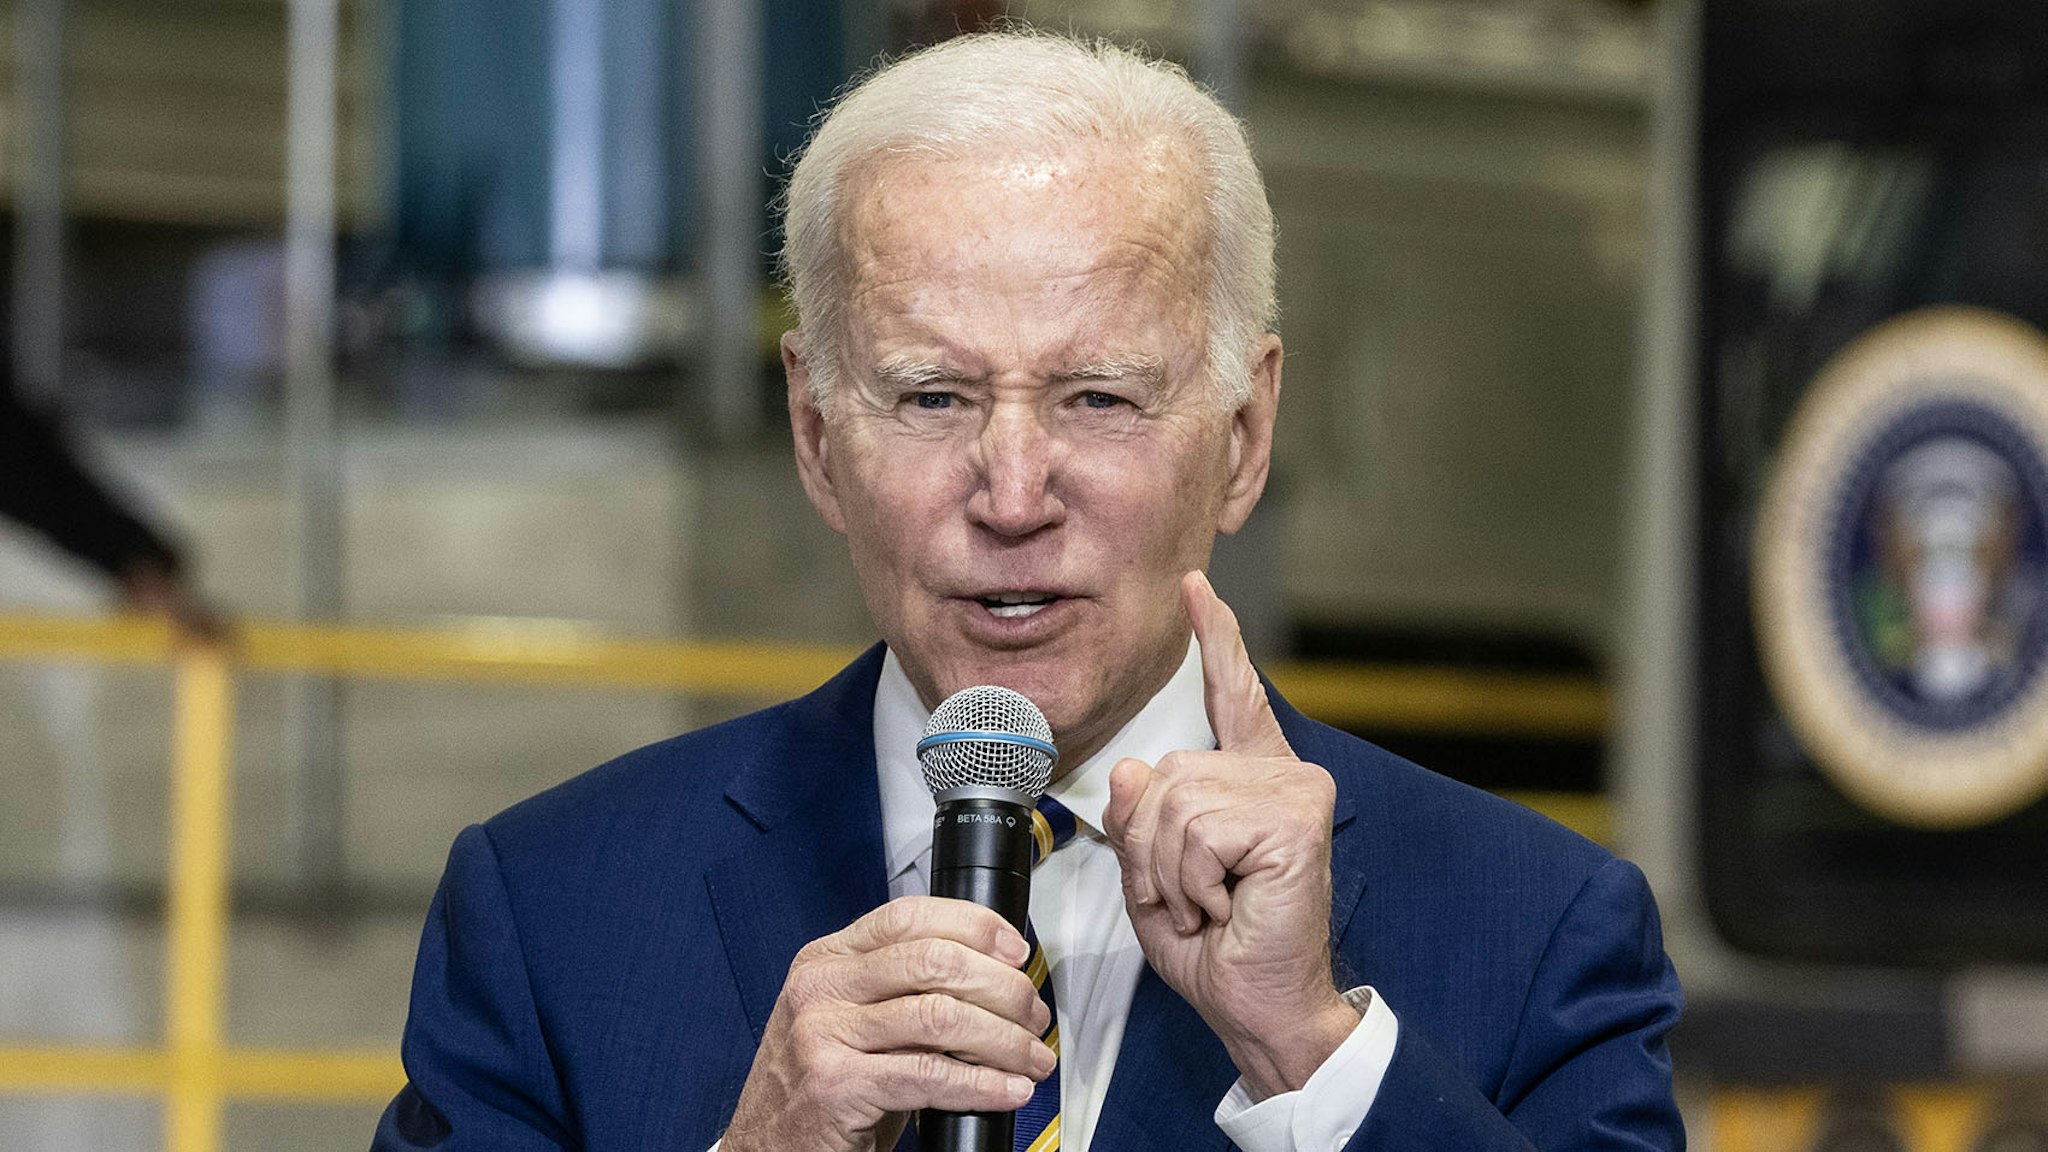 NEW YORK, UNITED STATES - 2023/01/31: President Joe Biden Jr. highlights Bipartisan Infrastructure Law funding for the Hudson River Tunnel project at the West Side Yard gate.